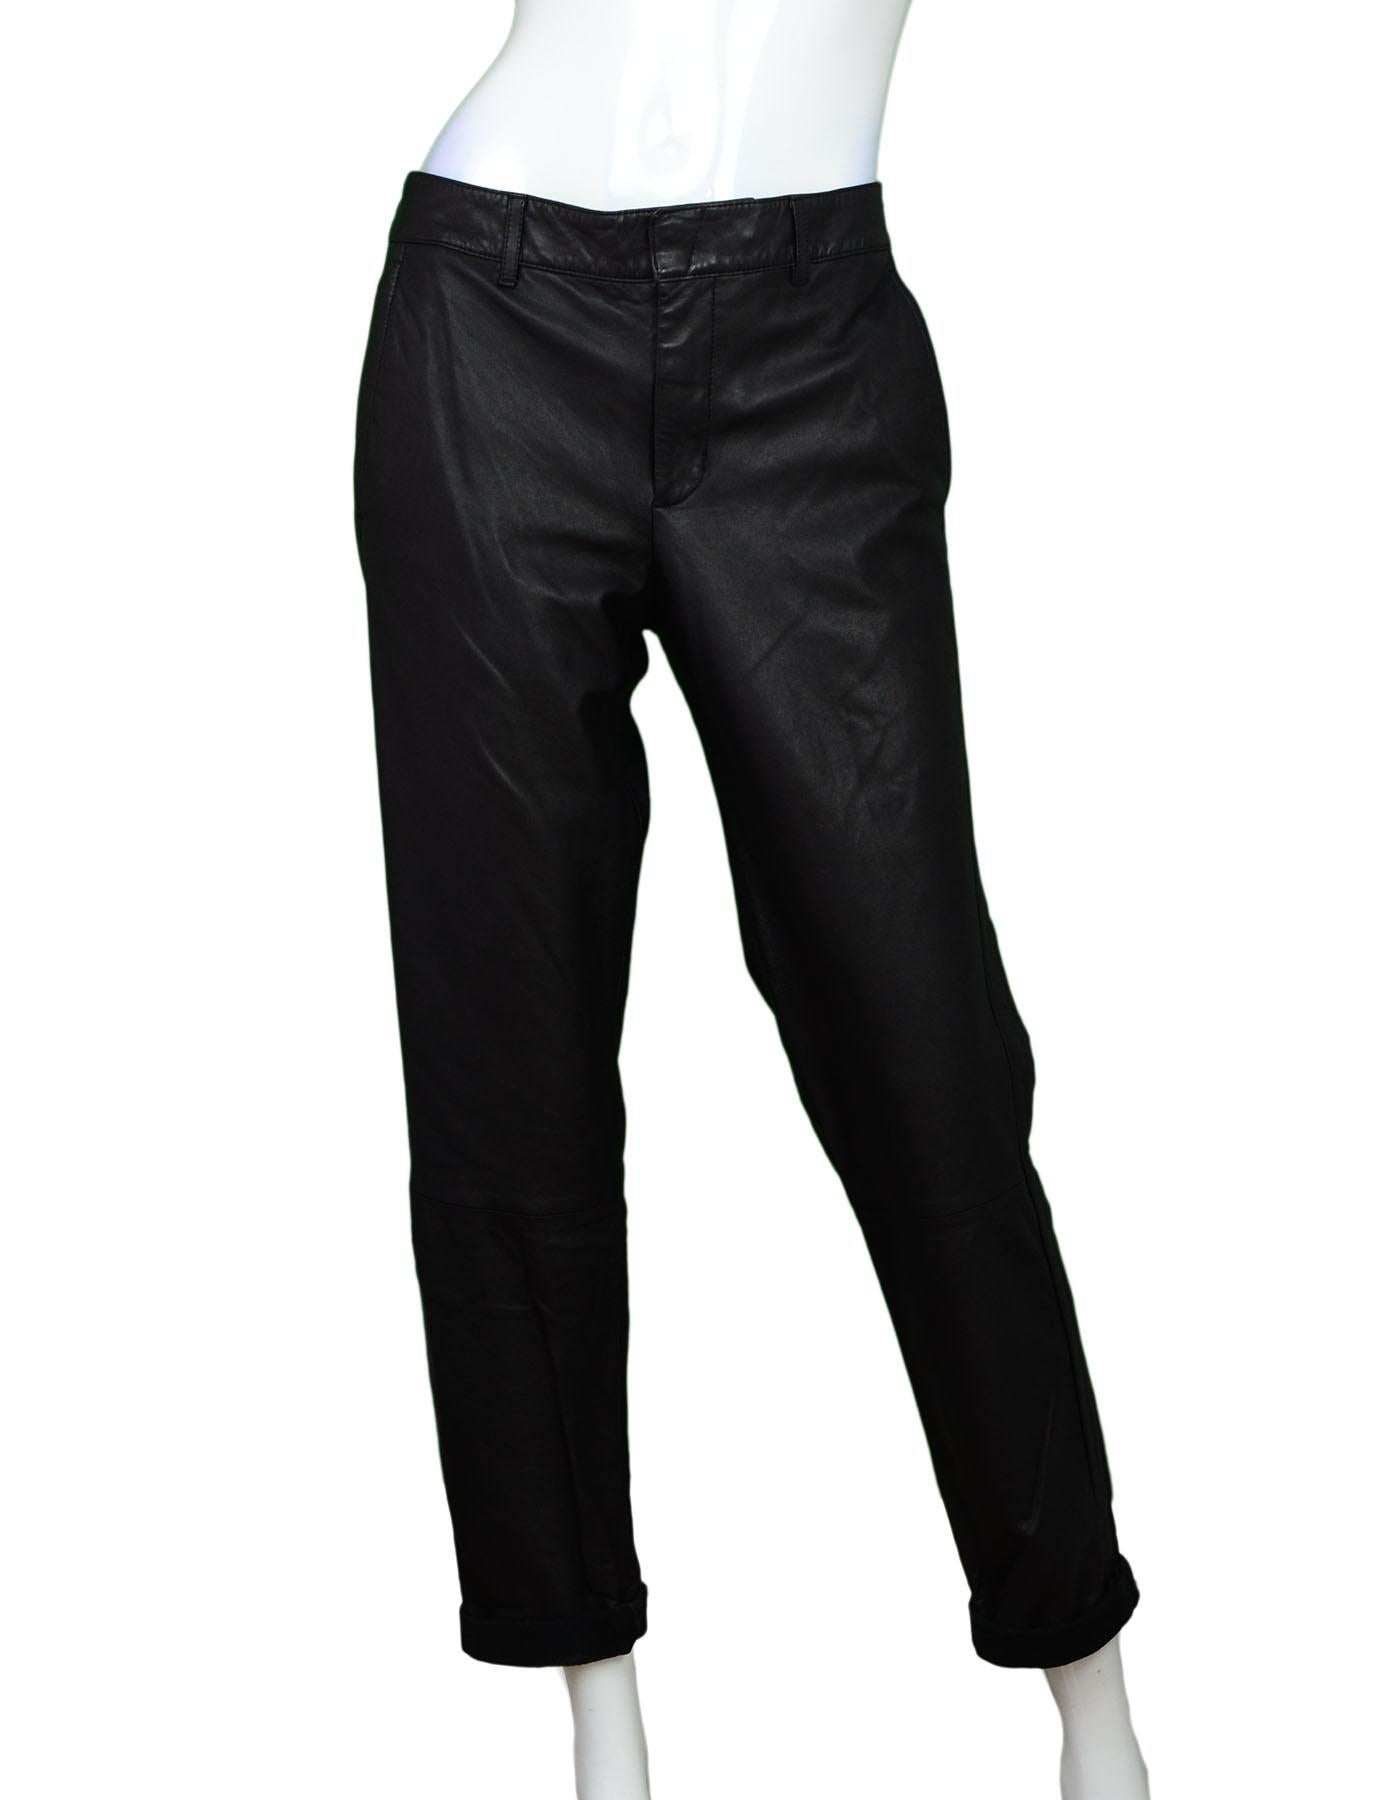 Vince Black Leather Pants Sz 10 NWT

Made In: China
Color: Black
Composition: 100% leather
Closure/Opening: Front zip and hook and eye closure
Exterior Pockets: Slit pockets at sides
Overall Condition: Excellent pre-owned condition - NWT
Included: